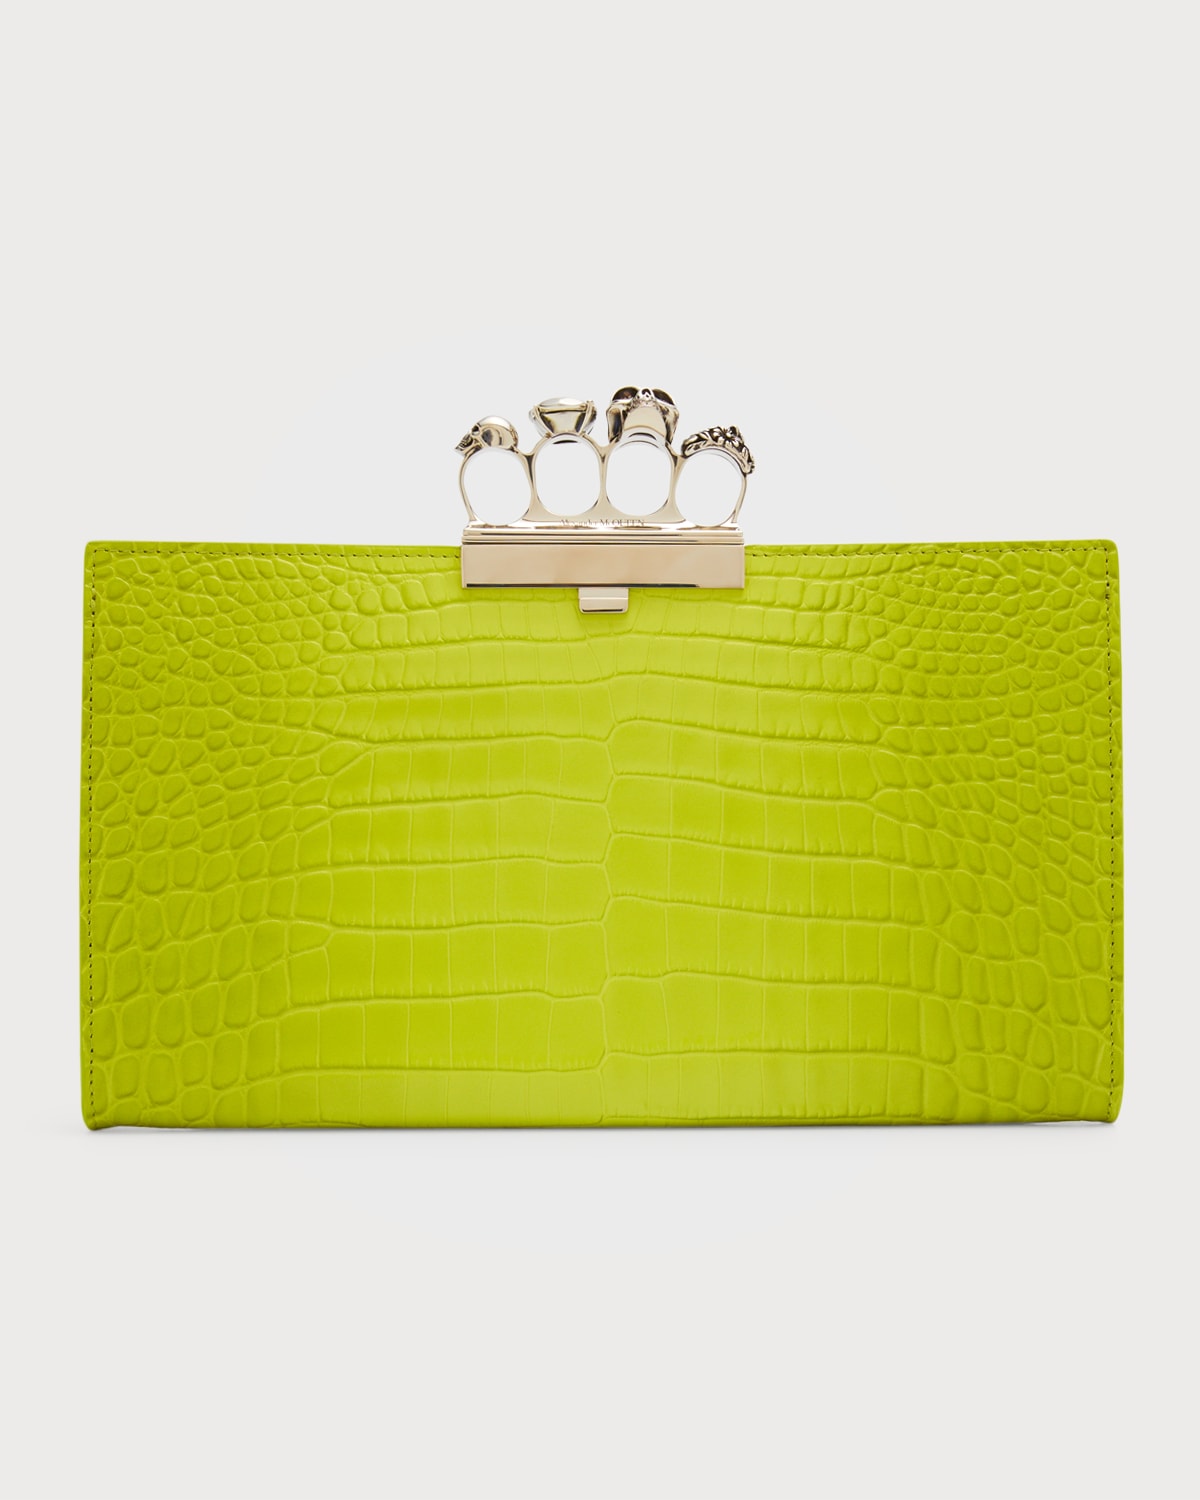 Alexander McQueen Four Ring Flat Croc-Embossed Pouch Clutch Bag